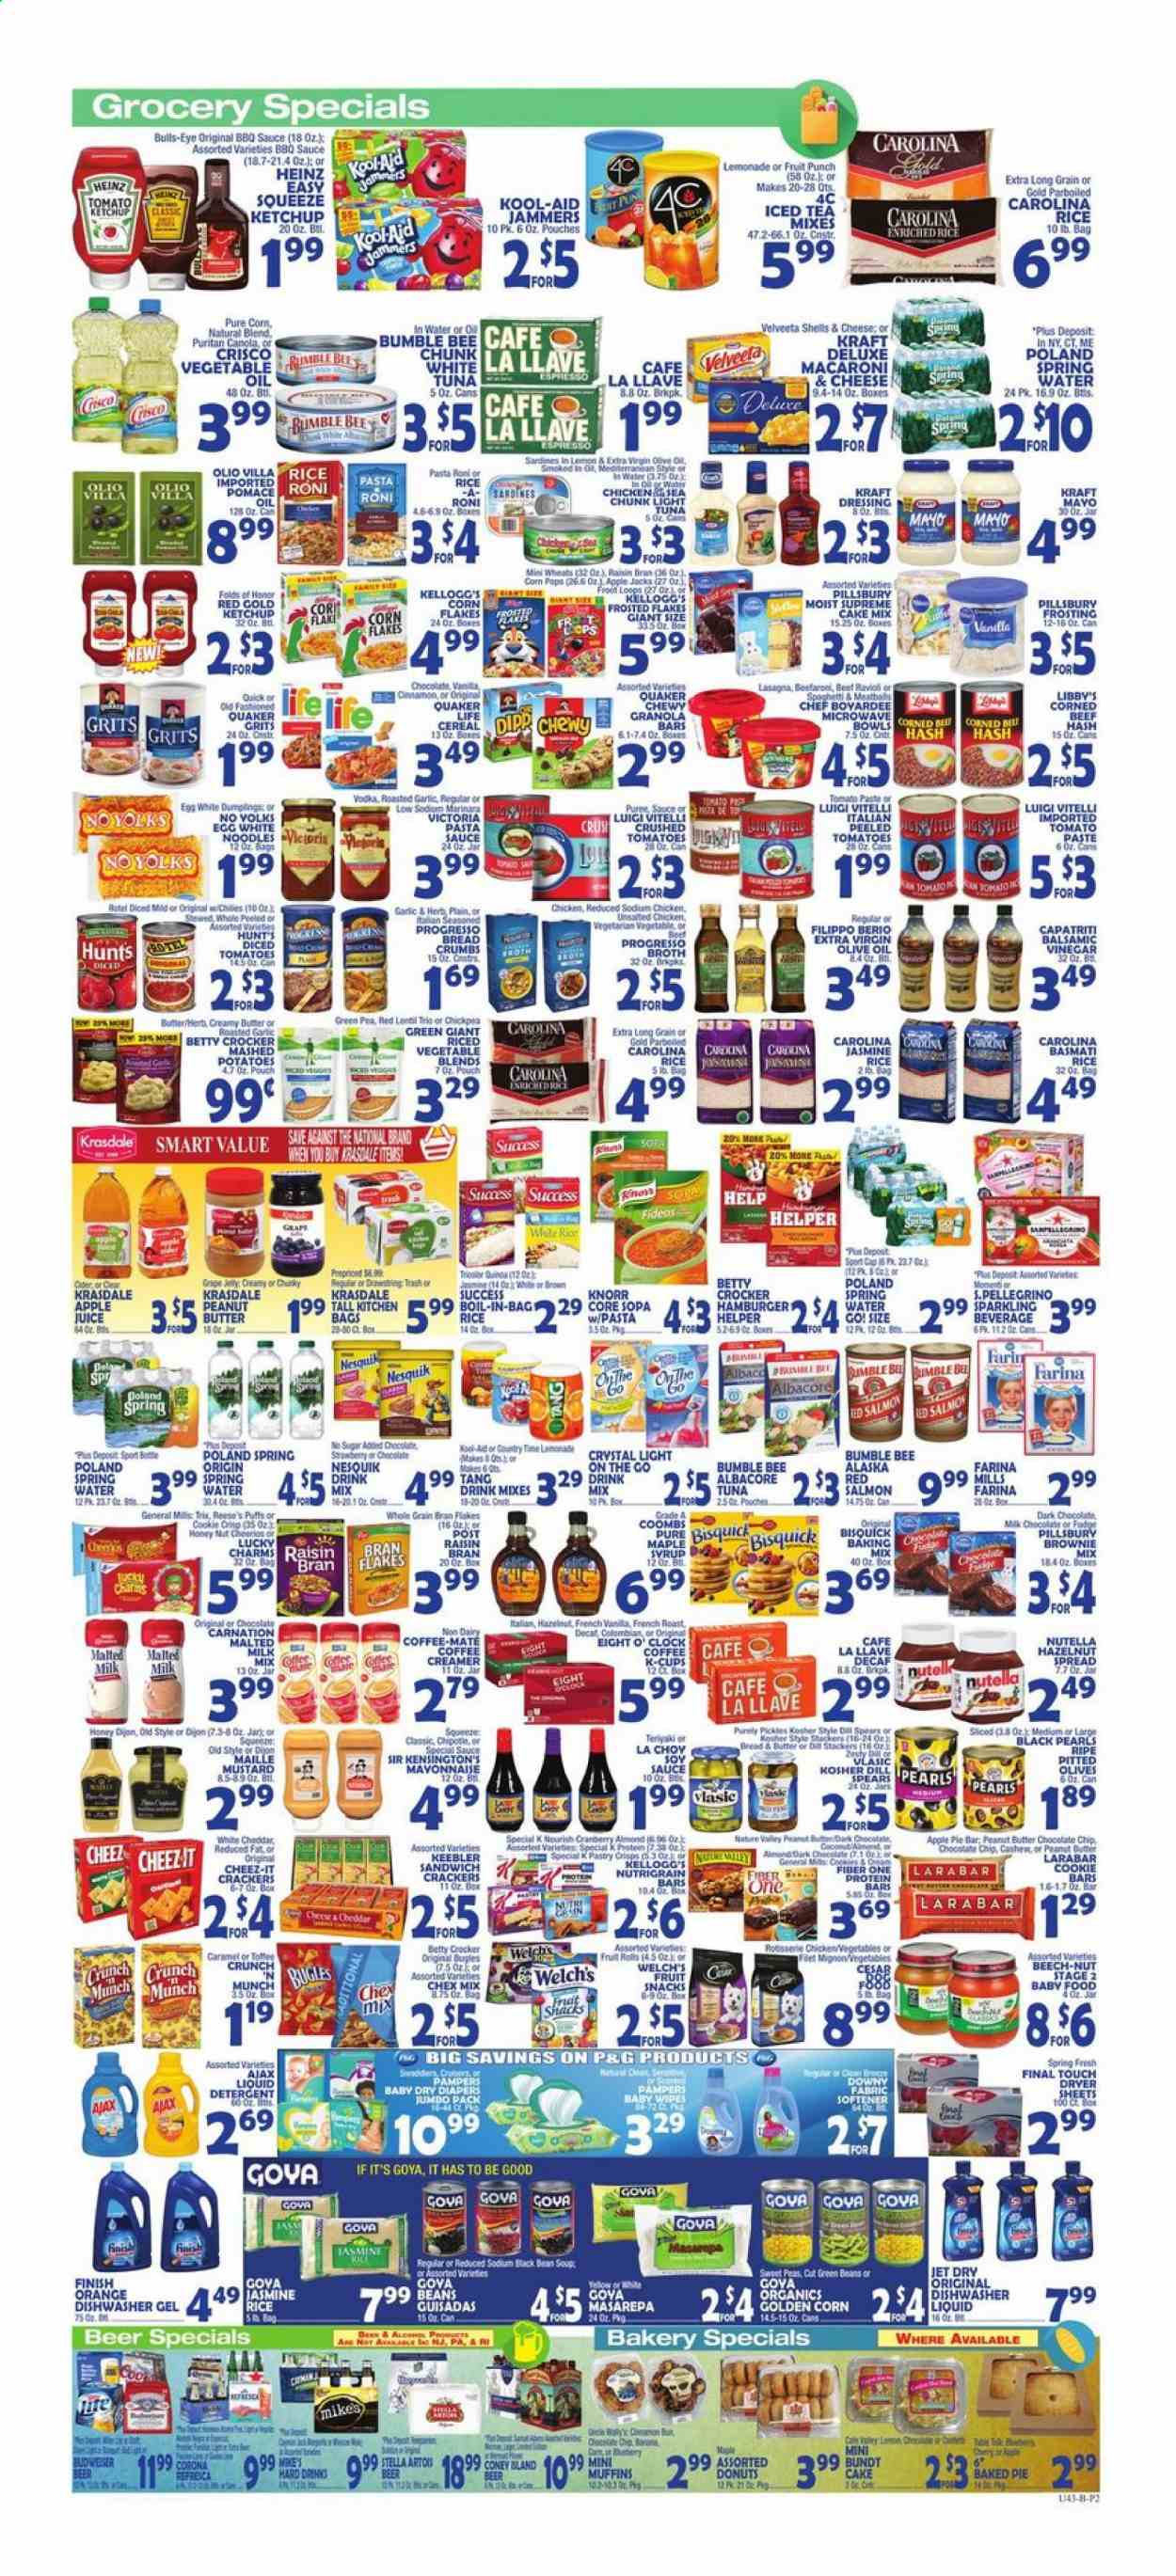 thumbnail - Bravo Supermarkets Flyer - 06/18/2021 - 06/24/2021 - Sales products - pie, apple pie, bundt, puffs, donut, muffin, breadcrumbs, brownie mix, cake mix, green beans, peas, snack, Welch's, salmon, tuna, macaroni & cheese, mashed potatoes, ravioli, pasta sauce, Bumble Bee, Knorr, sauce, Pillsbury, dumplings, Quaker, noodles, Progresso, lasagna meal, pasta sides, Kraft®, ready meal, corned beef, Velveeta, Nesquik, snack bar, Coffee-Mate, flavoured milk, eggs, creamer, coffee and tea creamer, mayonnaise, Reese's, fruit bar, milk chocolate, Nutella, chocolate chips, crackers, Kellogg's, fruit snack, Keebler, fruit rolls, General Mills, bars, Cheez-It, Chex Mix, crisps, Bisquick, Crisco, frosting, grits, broth, baking mix, canned tuna, tomato paste, Heinz, light tuna, Goya, Chef Boyardee, diced tomatoes, canned fish, cereals, Cheerios, corn flakes, protein bar, granola bar, bran flakes, Trix, Frosted Flakes, Raisin Bran, Nature Valley, Fiber One, basmati rice, rice, jasmine rice, parboiled rice, BBQ sauce, mustard, soy sauce, ketchup, balsamic vinegar, extra virgin olive oil, vinegar, olive oil, oil, grape jelly, hazelnut spread, apple juice, lemonade, juice, fruit drink, ice tea, Country Time, fruit punch, spring water, San Pellegrino, powder drink, coffee capsules, K-Cups, Eight O'Clock, alcohol, vodka, cider, beer, Stella Artois, Corona Extra, chicken, wipes, Pampers, baby wipes, nappies, detergent, Ajax, fabric softener, dryer sheets, Downy Laundry, Jet, Hask, trash bags. Page 2.